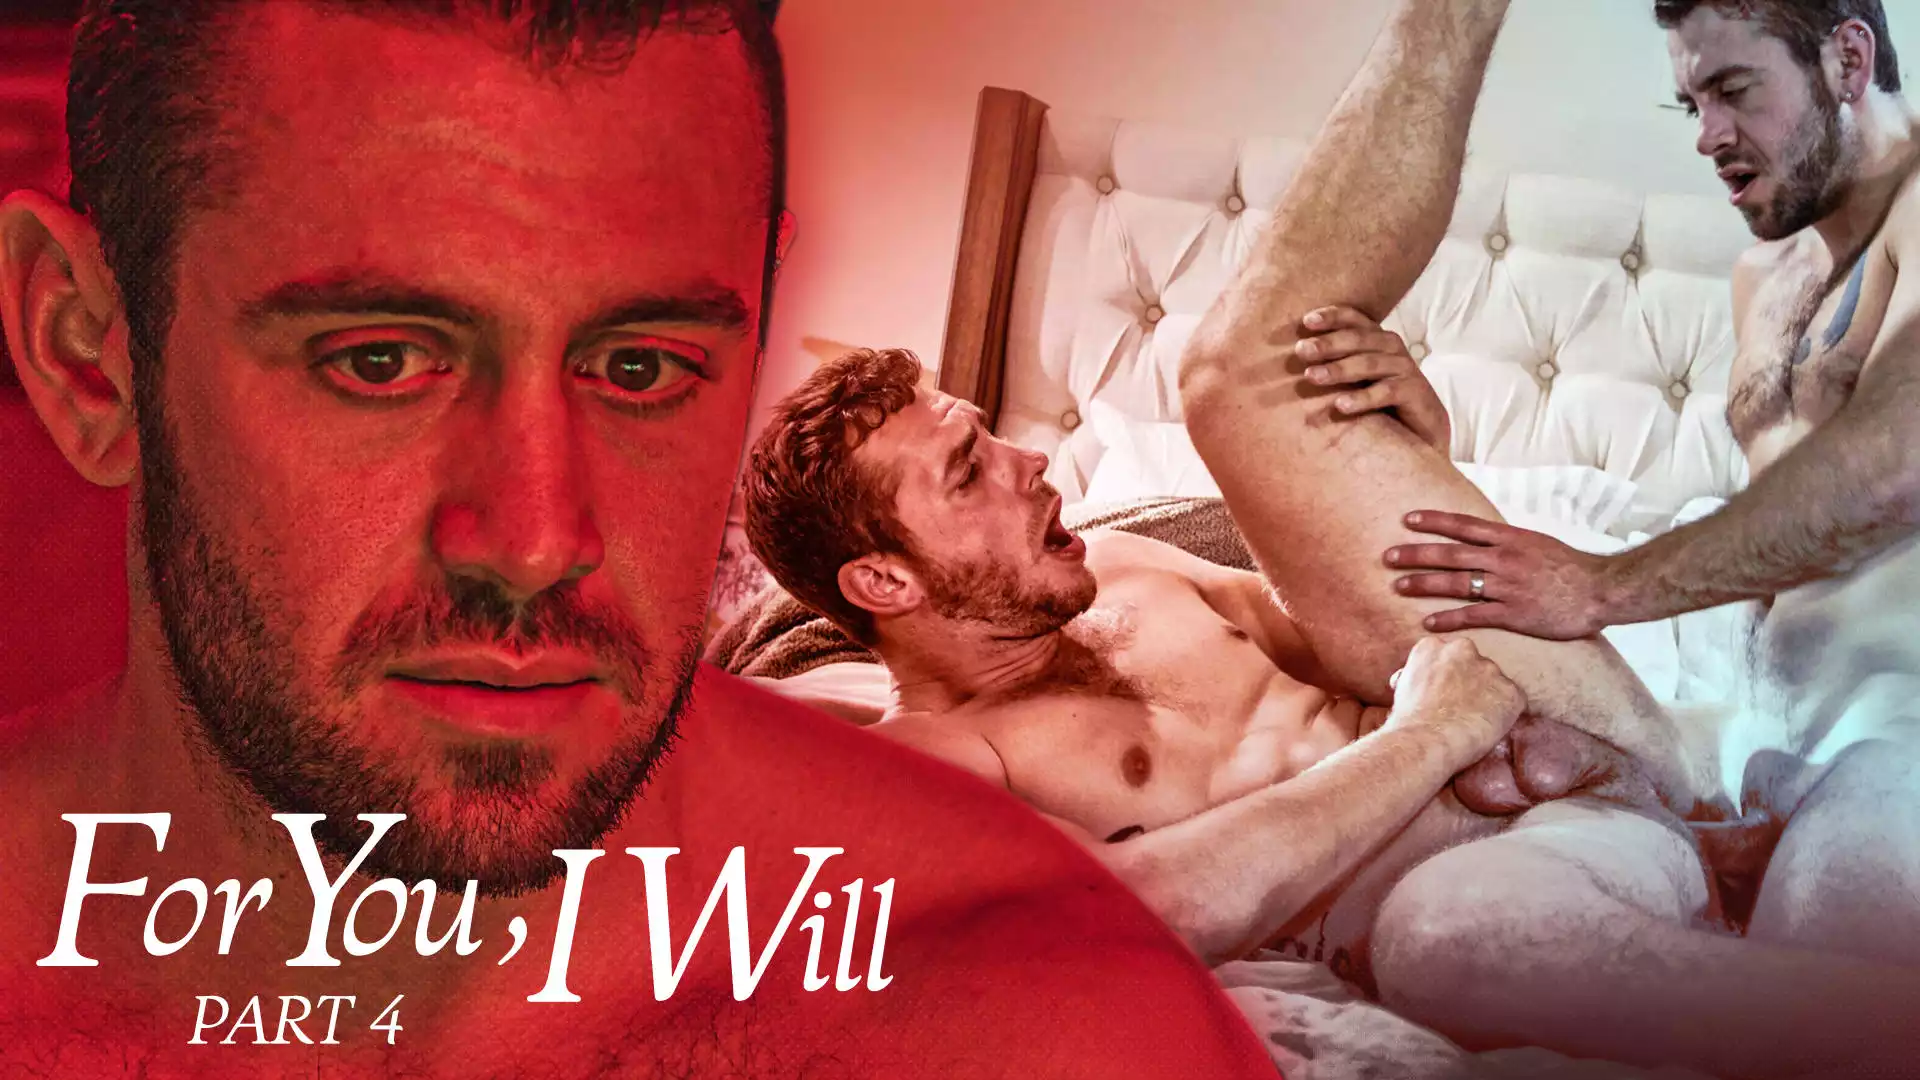 For You, I Will, Part 4 – Dante Colle and Carter Woods